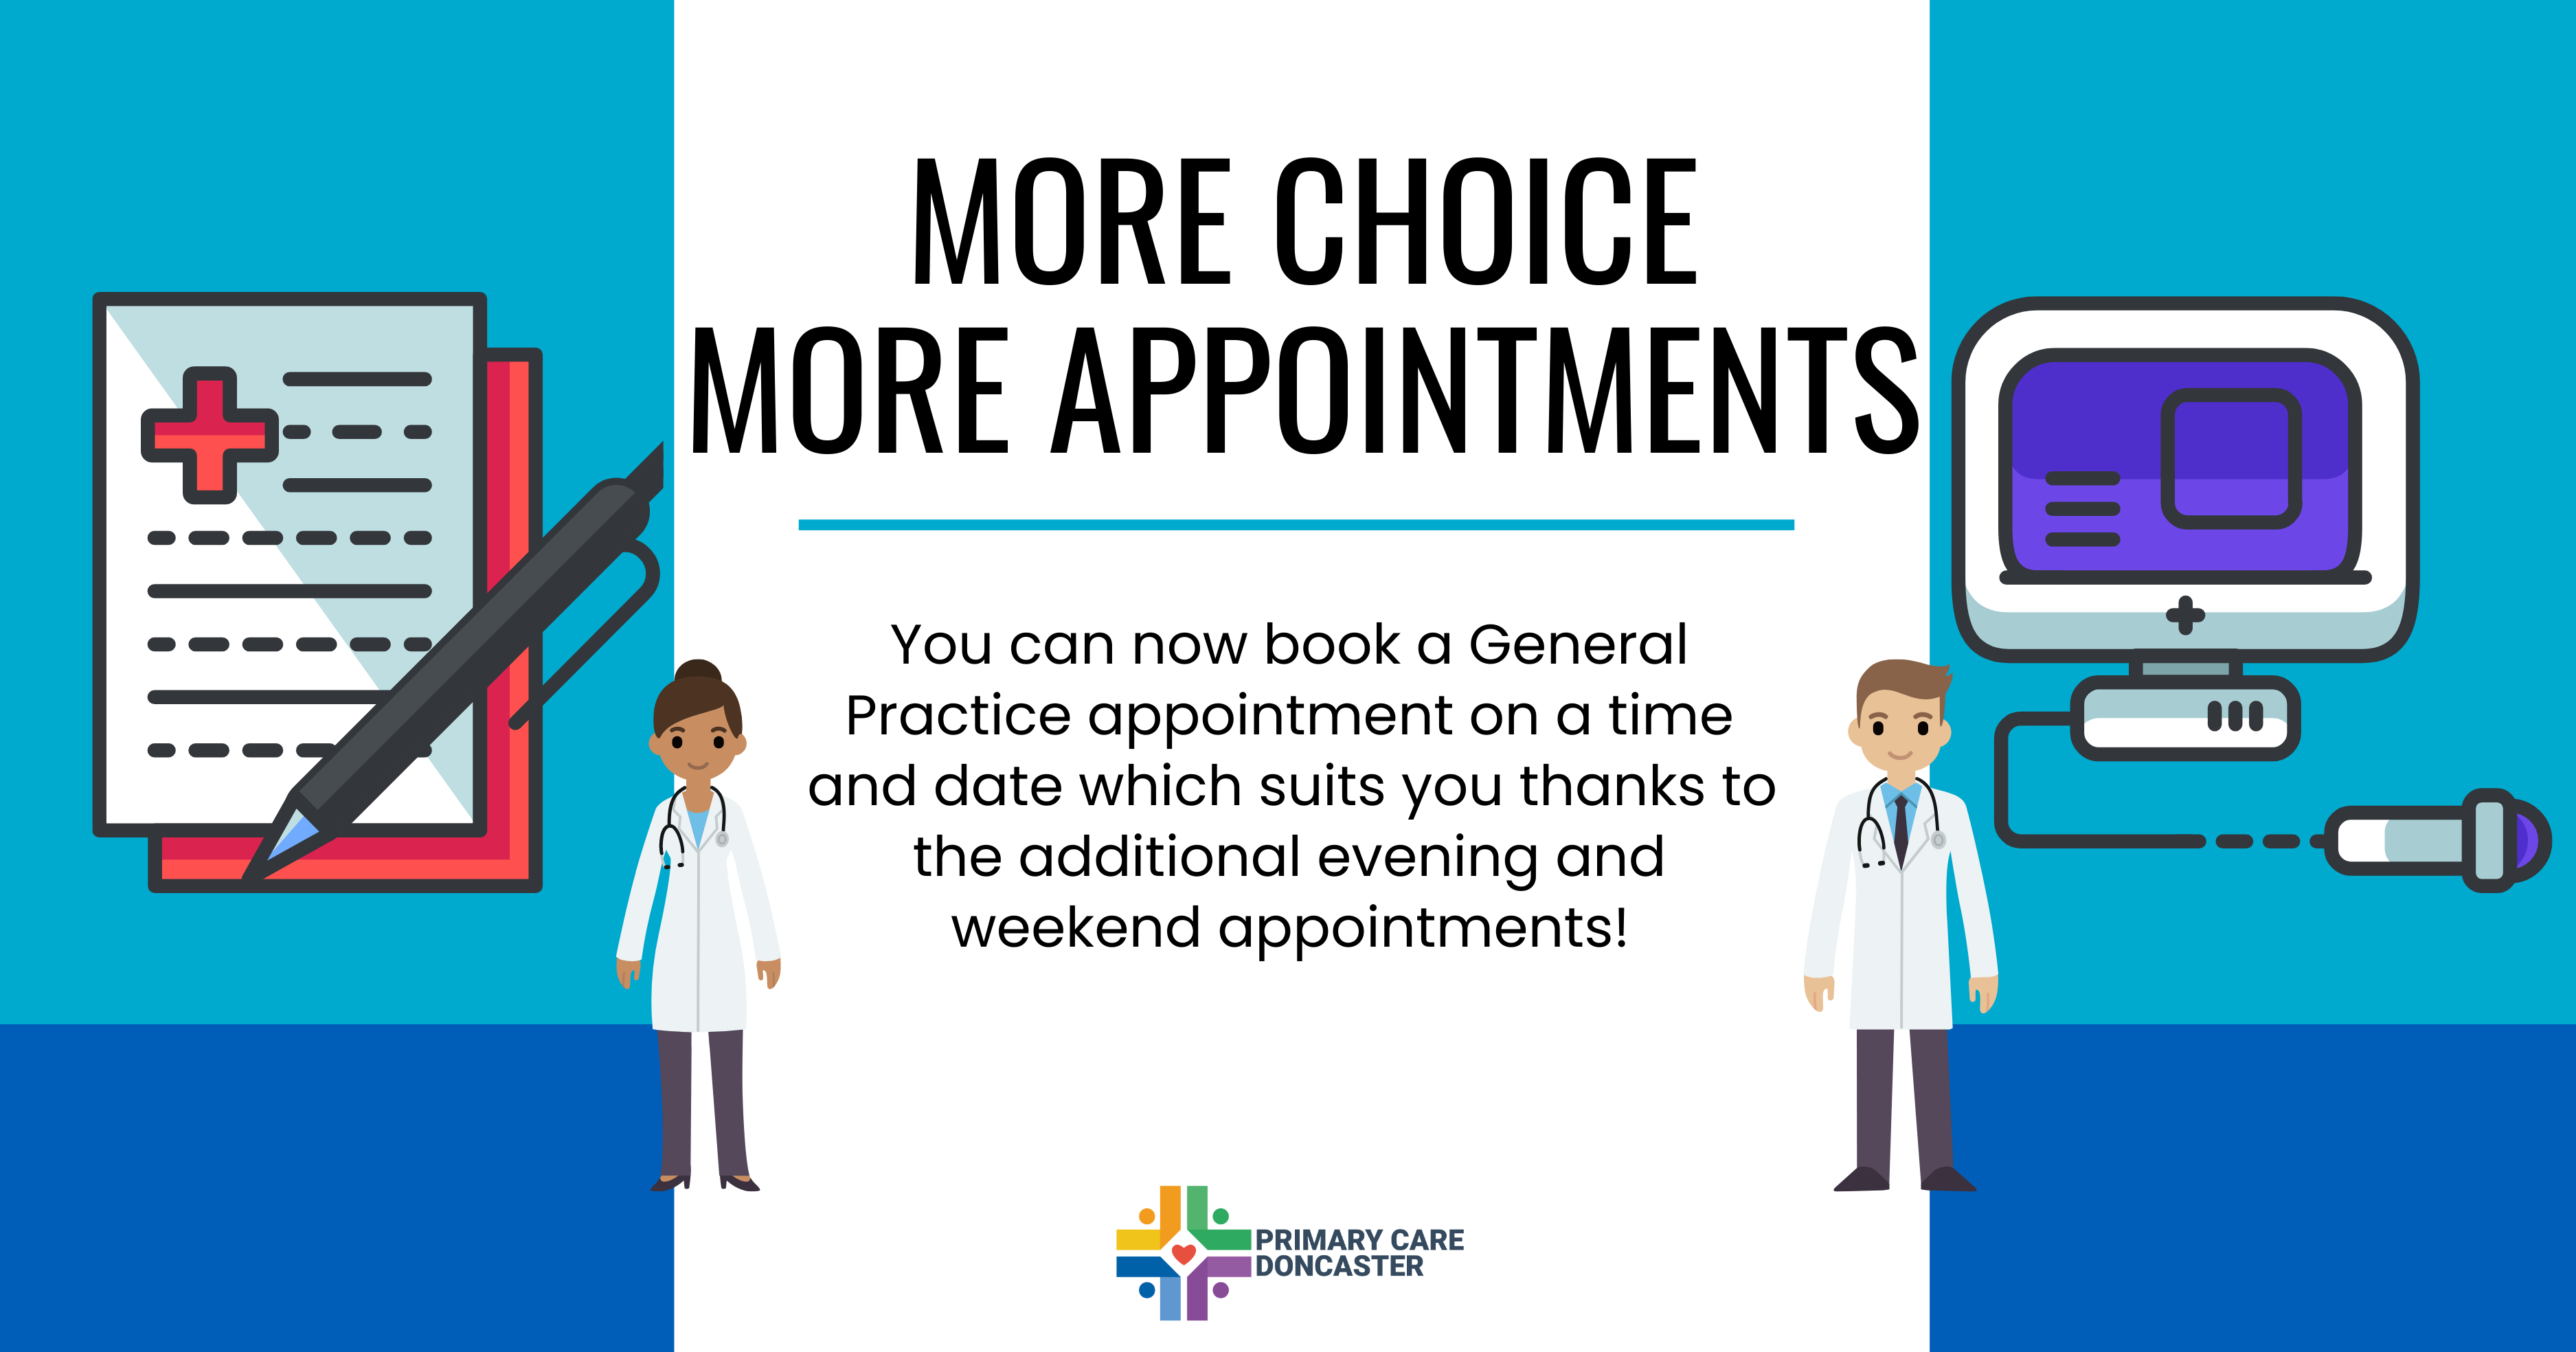 Evening and Weekend appointments